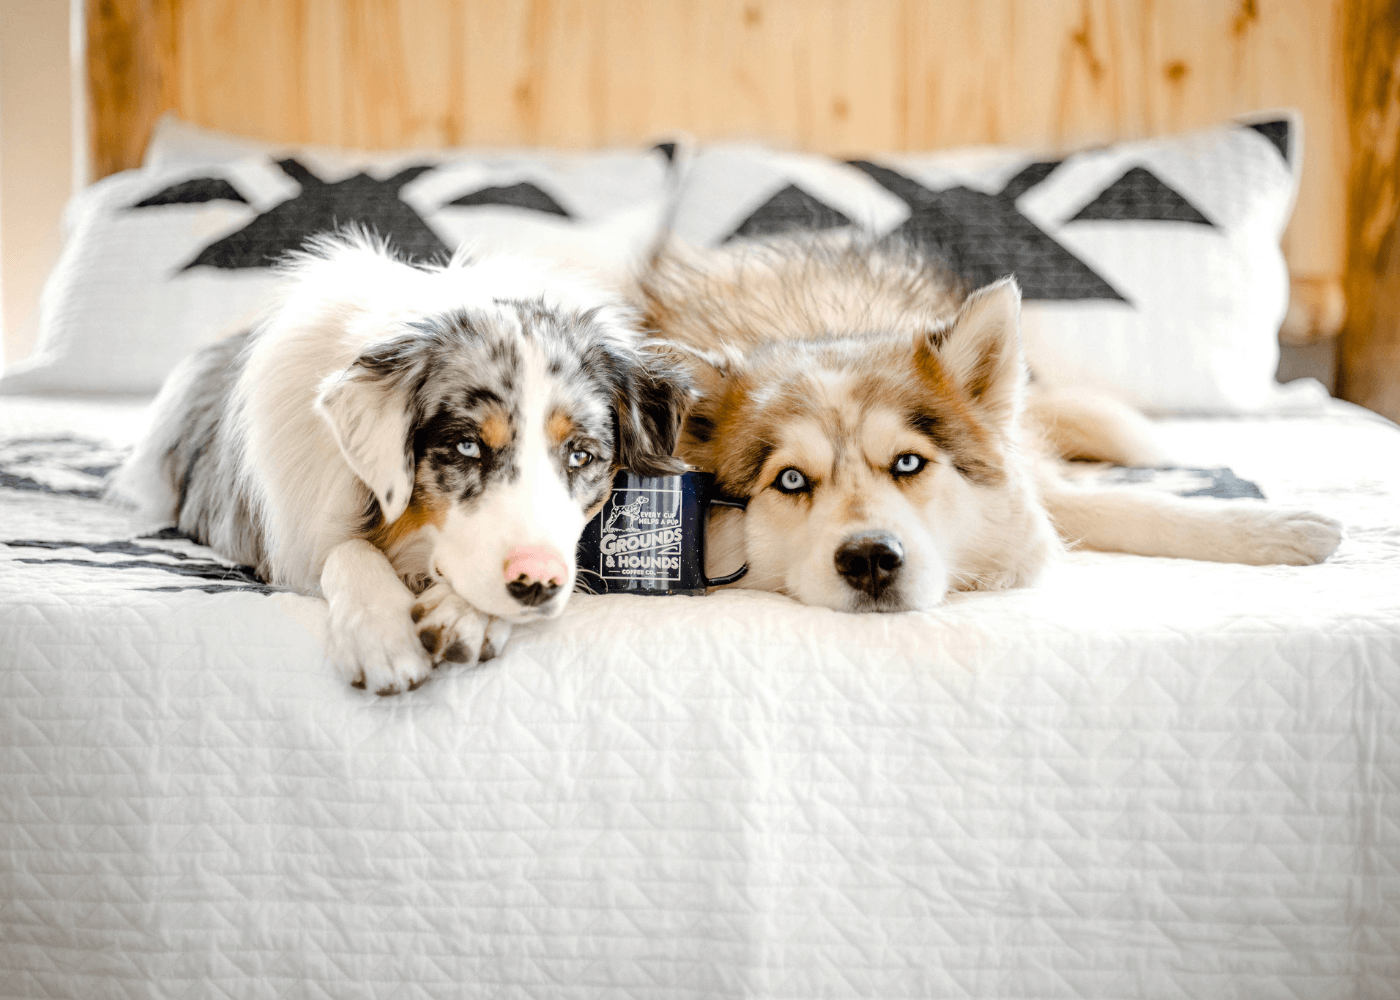 Dogs Lying on Bed